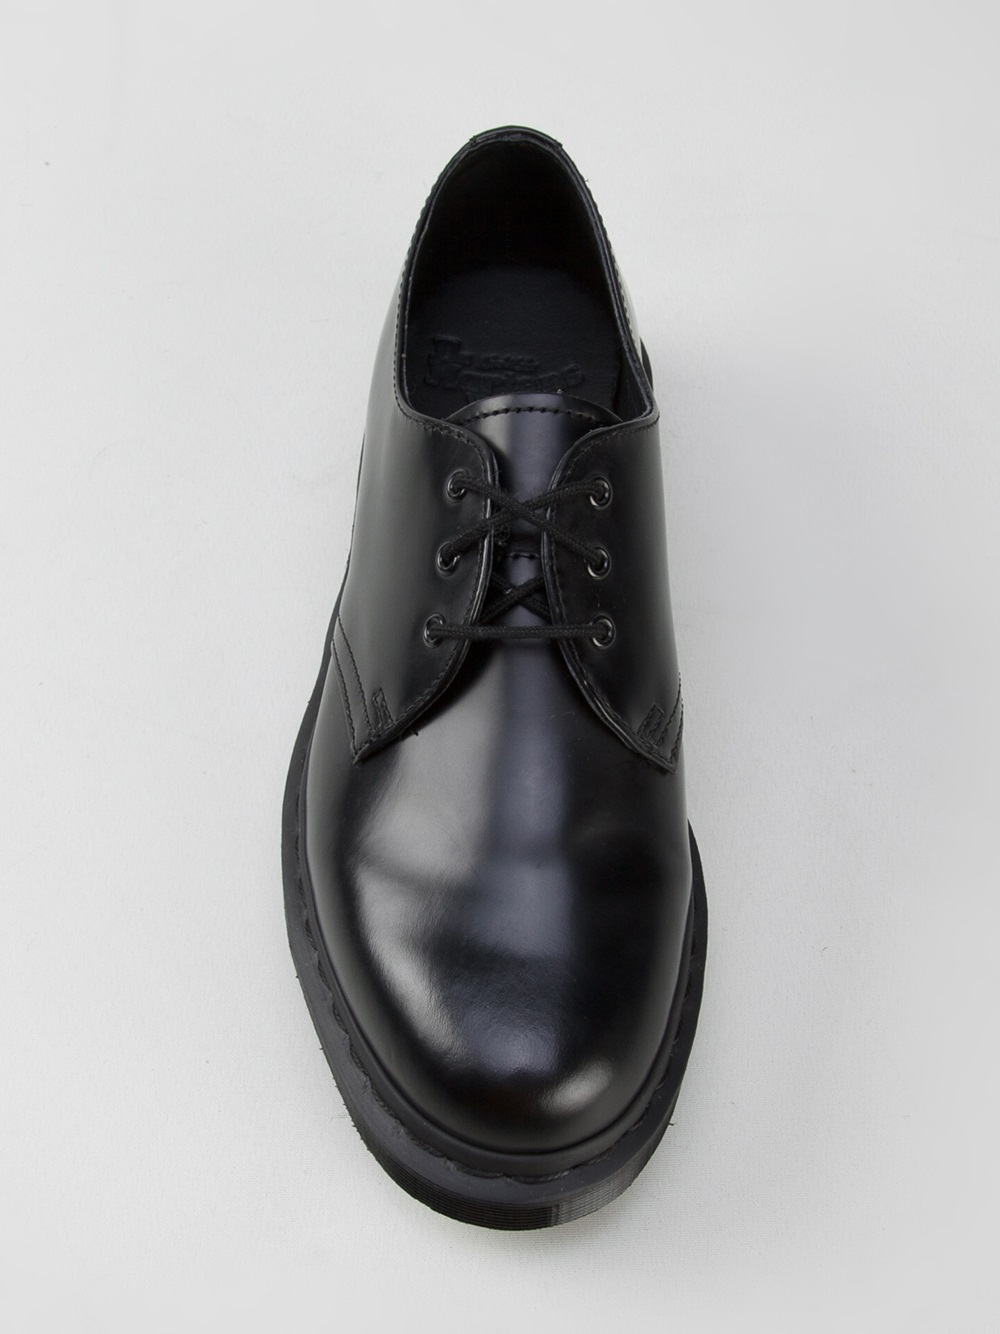 Dr. Martens '1461 Mono' Shoes in Black - Lyst